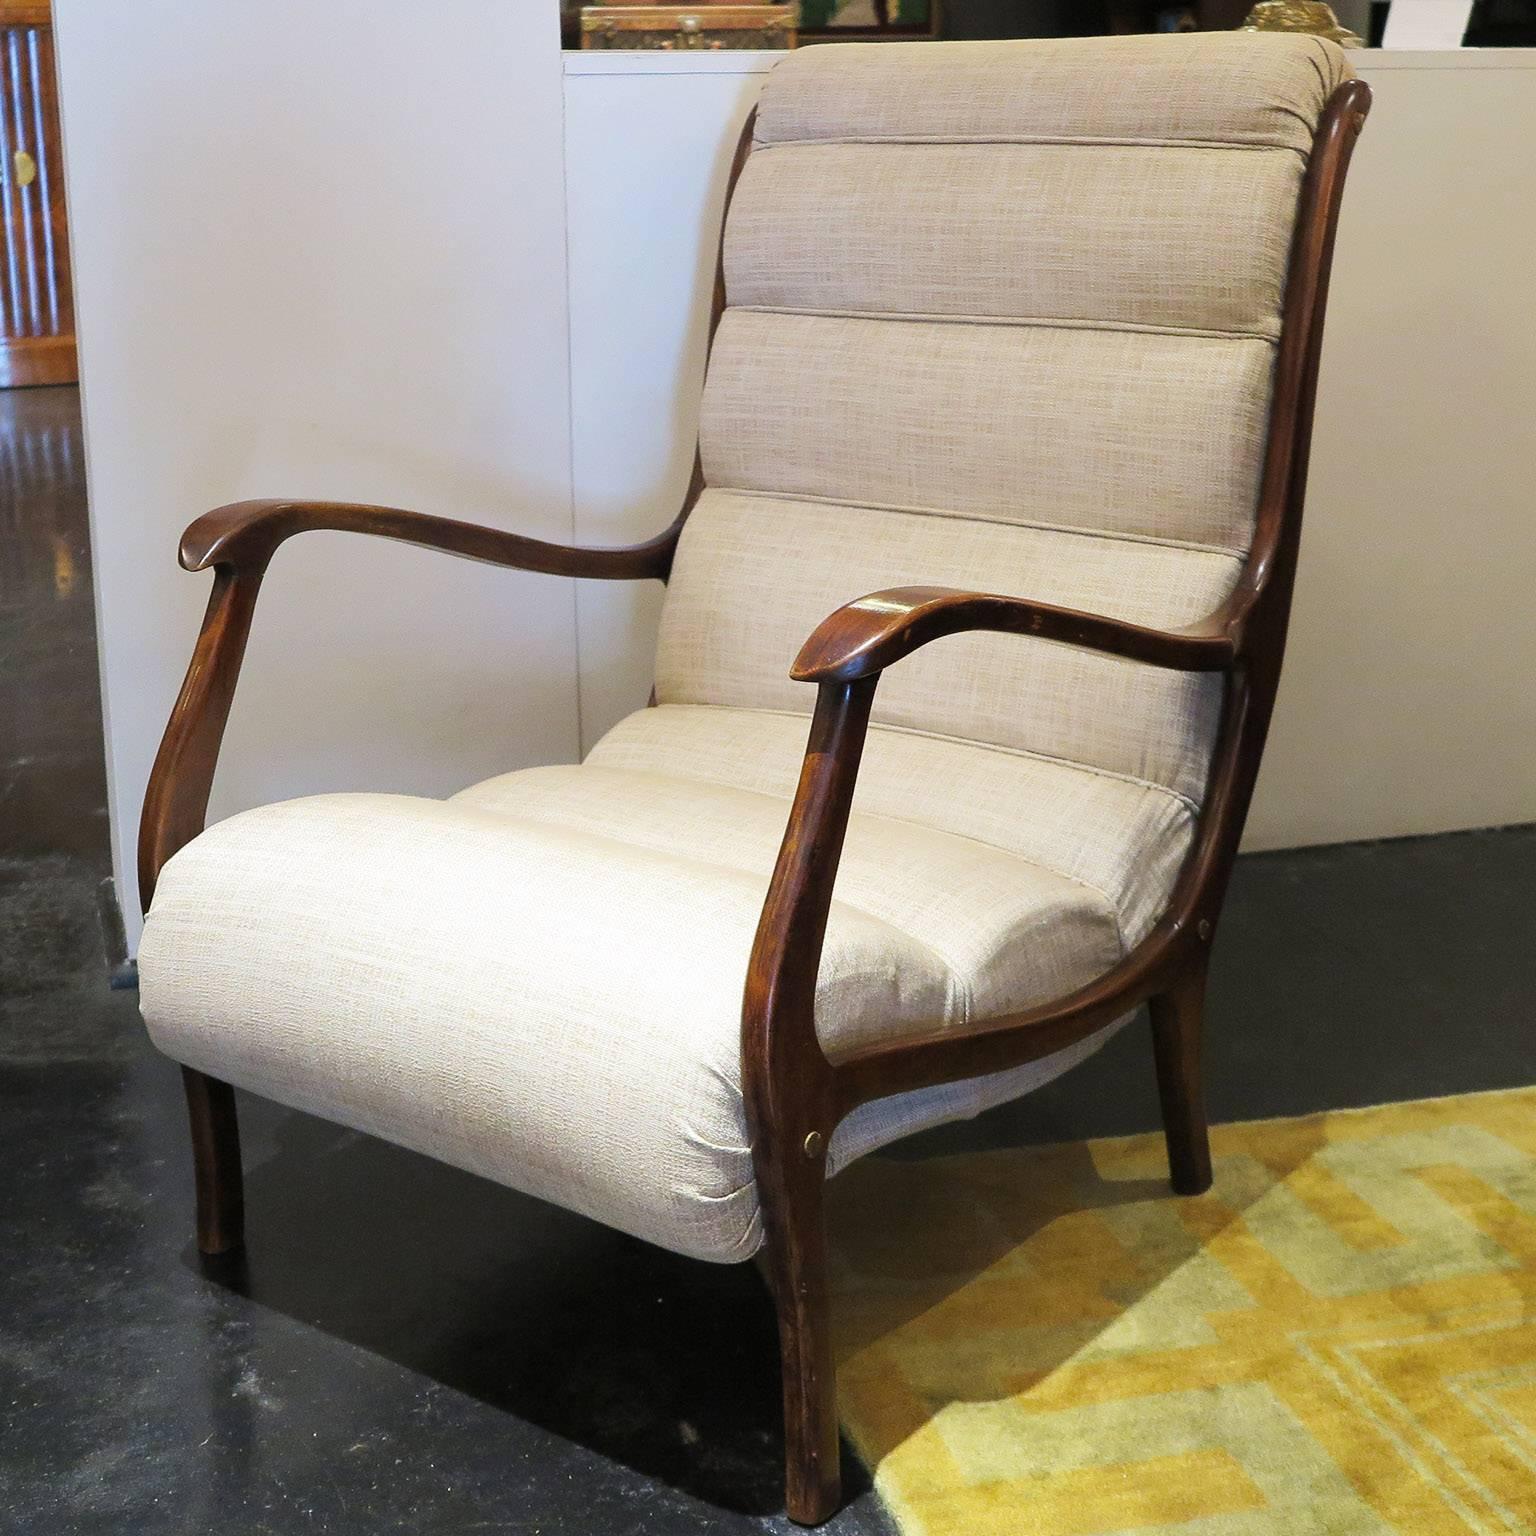 Pair of Mid-Century lounge chairs in stained beech wood with thin curved arms. The curved upholstery adds an unusual touch to the otherwise sleek chairs while keeping the seat comfortable. Chairs are in original condition.